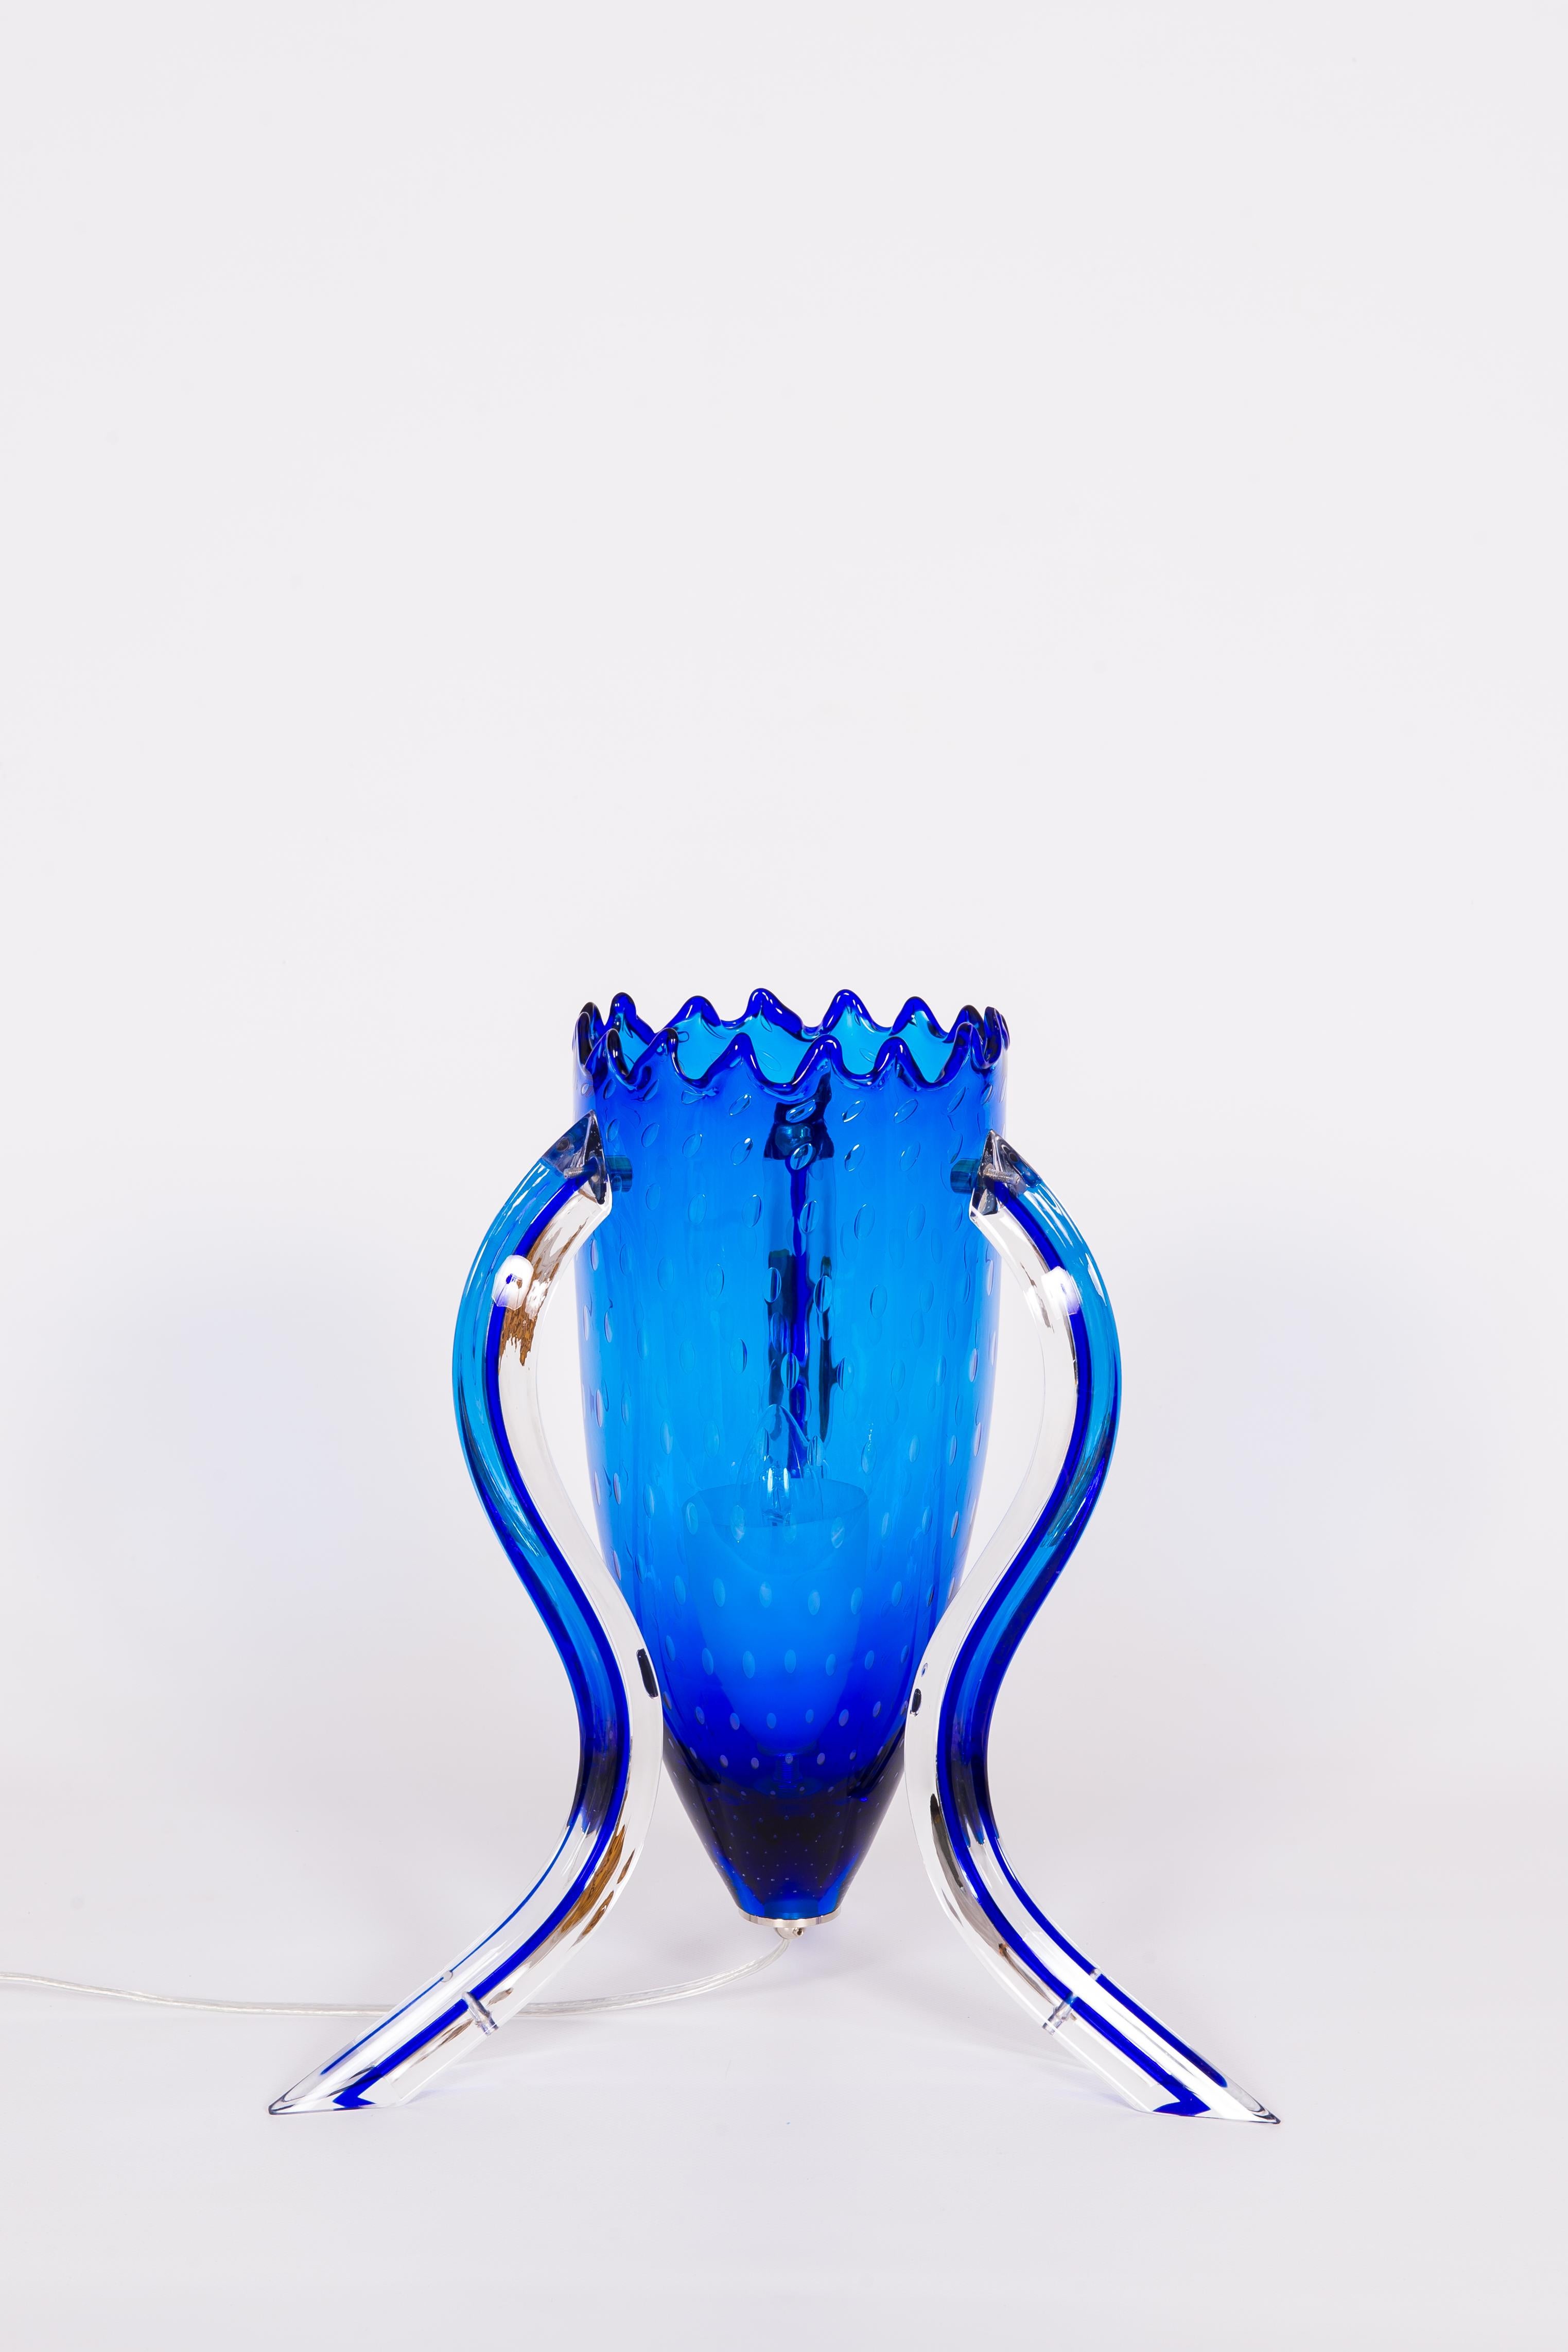 Pair of Blue Murano Glass Table Lamps with Morise Decorations, Italy 1990s For Sale 5